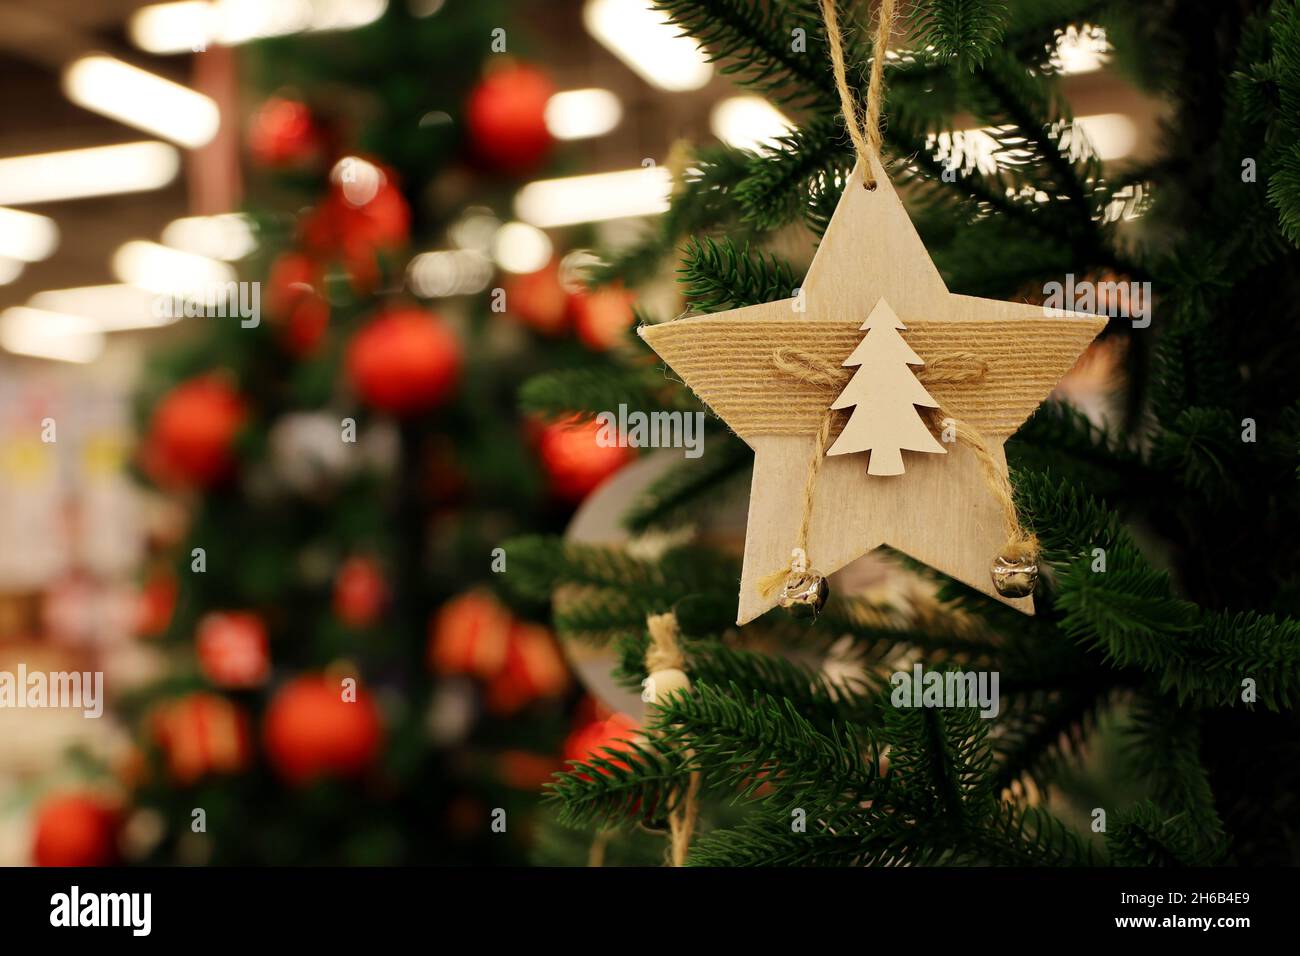 Christmas tree with decorations on blurred lights background. Wooden toy in star shape on a branch, New Year celebration Stock Photo